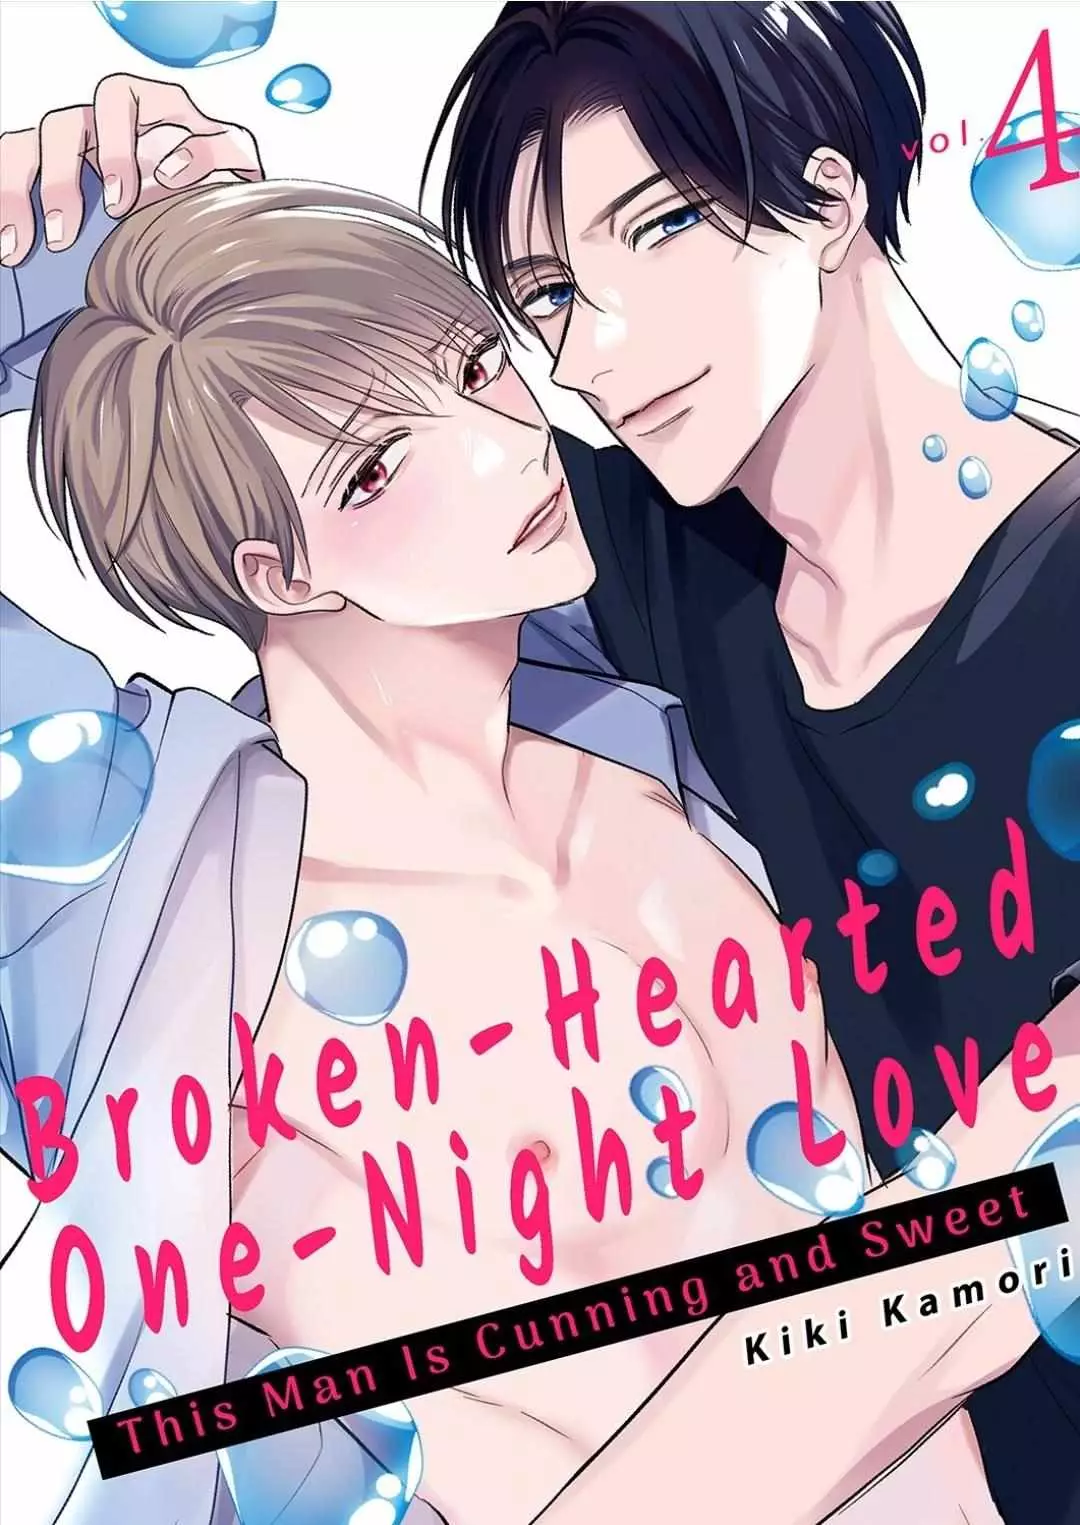 Broken-Hearted One-Night Love ~This Man Is Cunning And Sweet~ - 4 page 1-ce9a036f